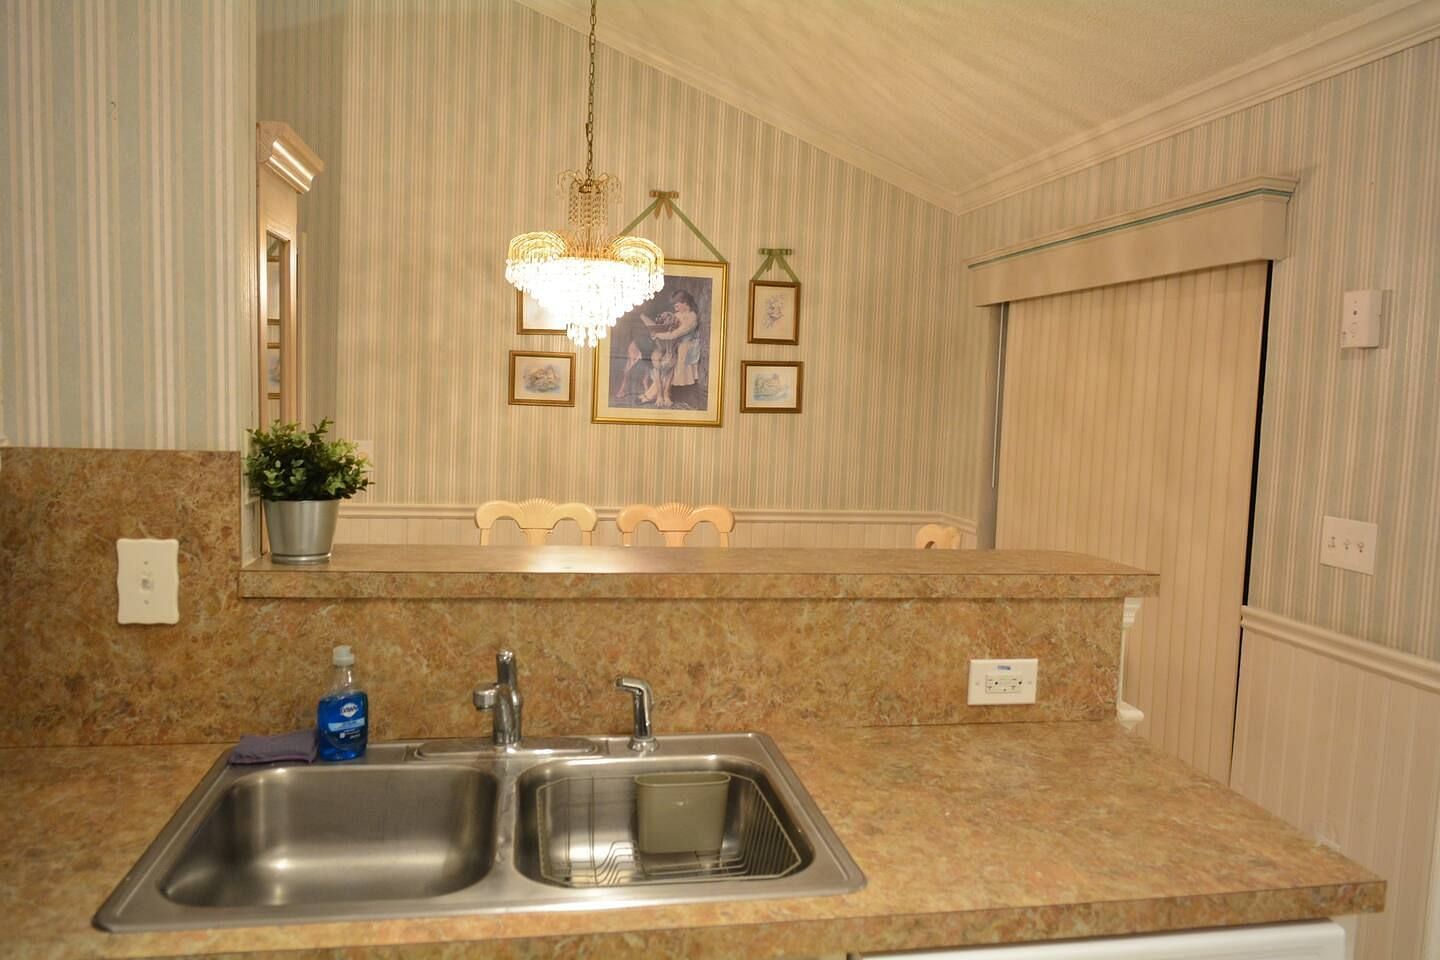 JWguest House at Orlando, Florida | Private Home with Pool, 3 Bd 2 Bath, Close to Disney | Jwbnb no brobnb 15